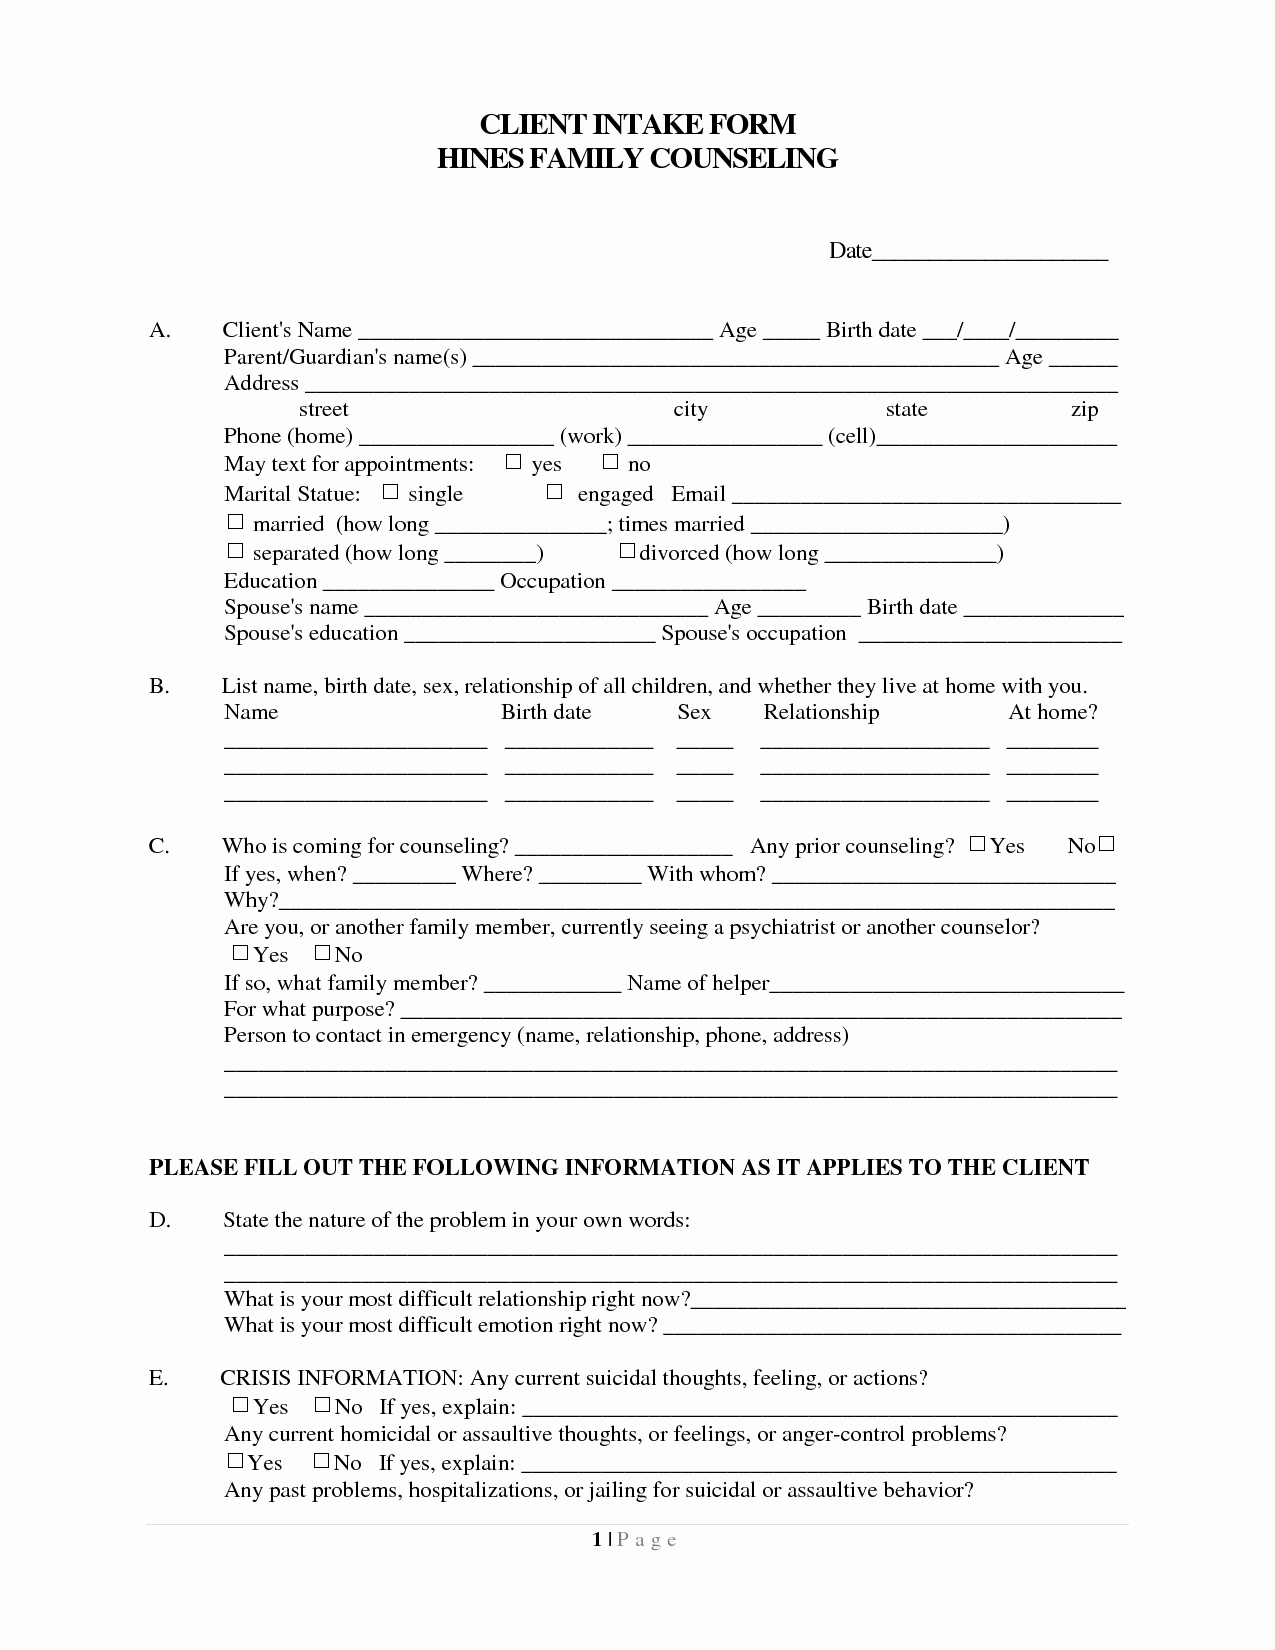 Client Intake form Template Beautiful Intake form for Counseling Clients Google Search